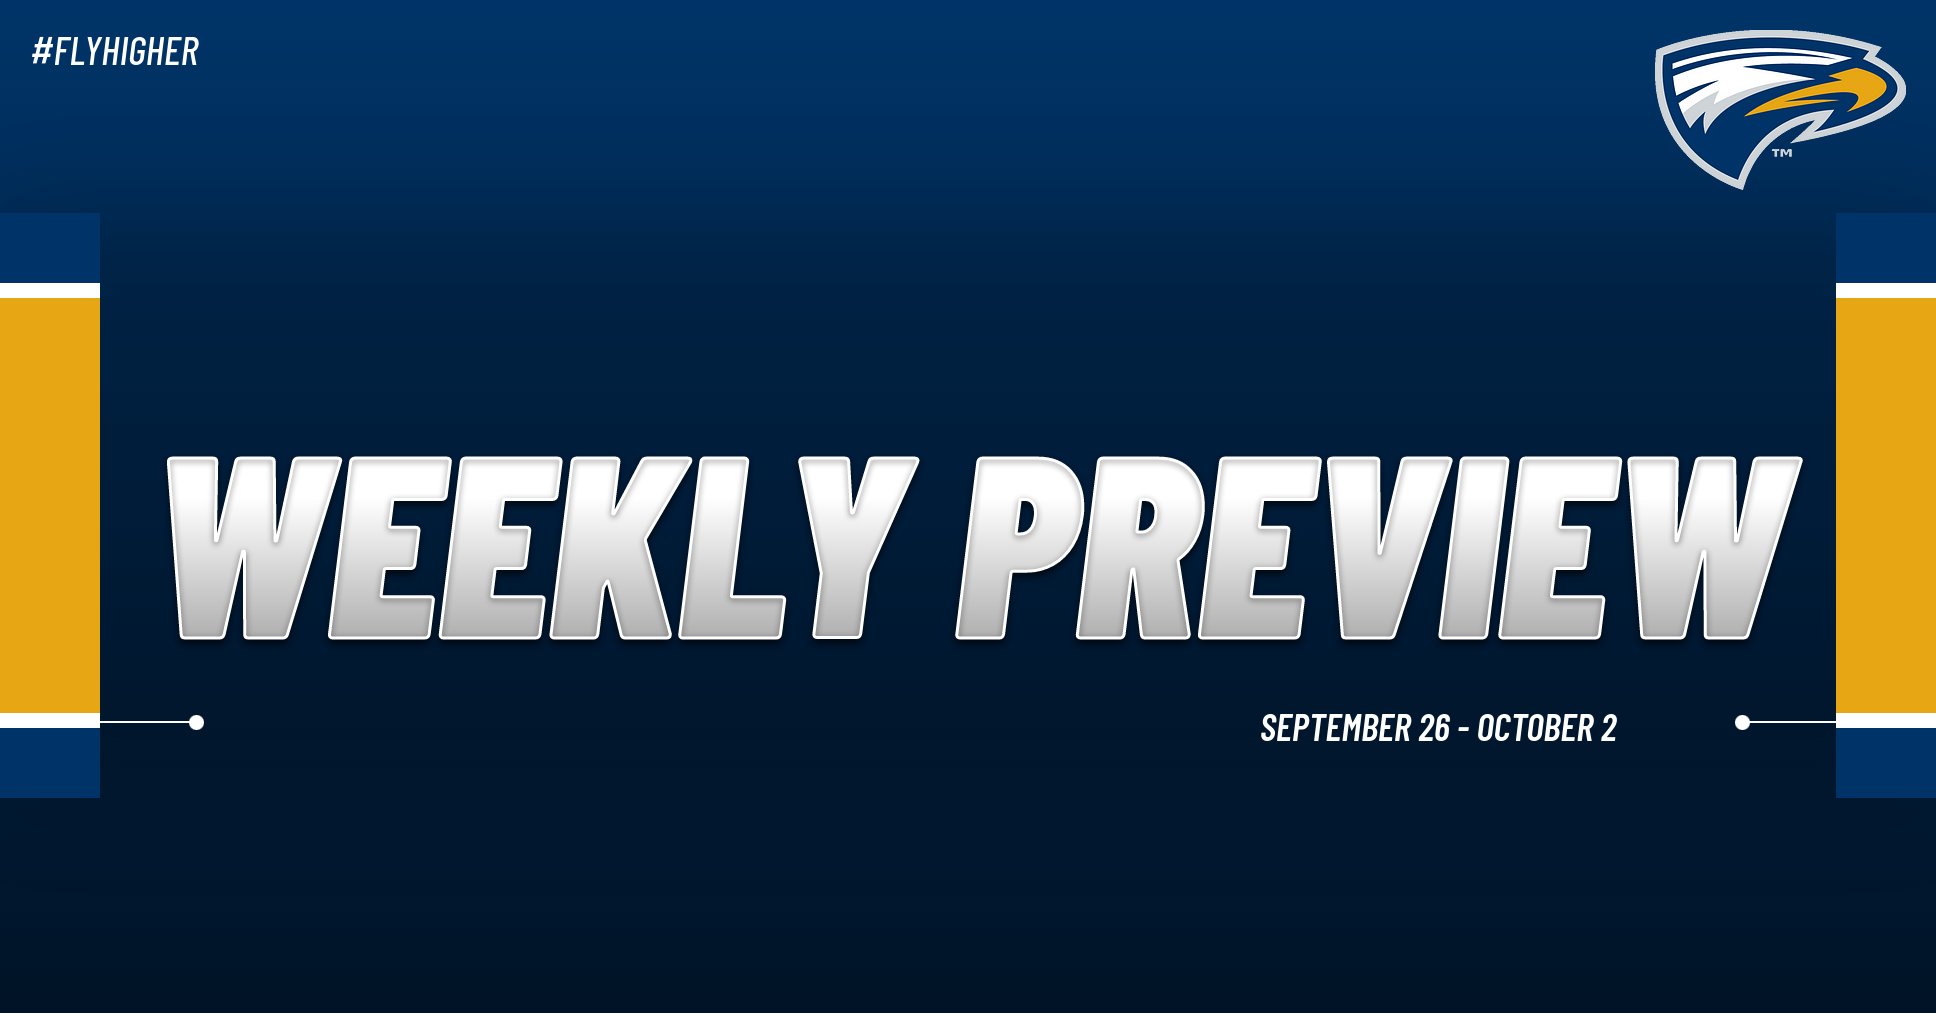 Emory Athletics Weekly Preview: 9/26 - 10/2